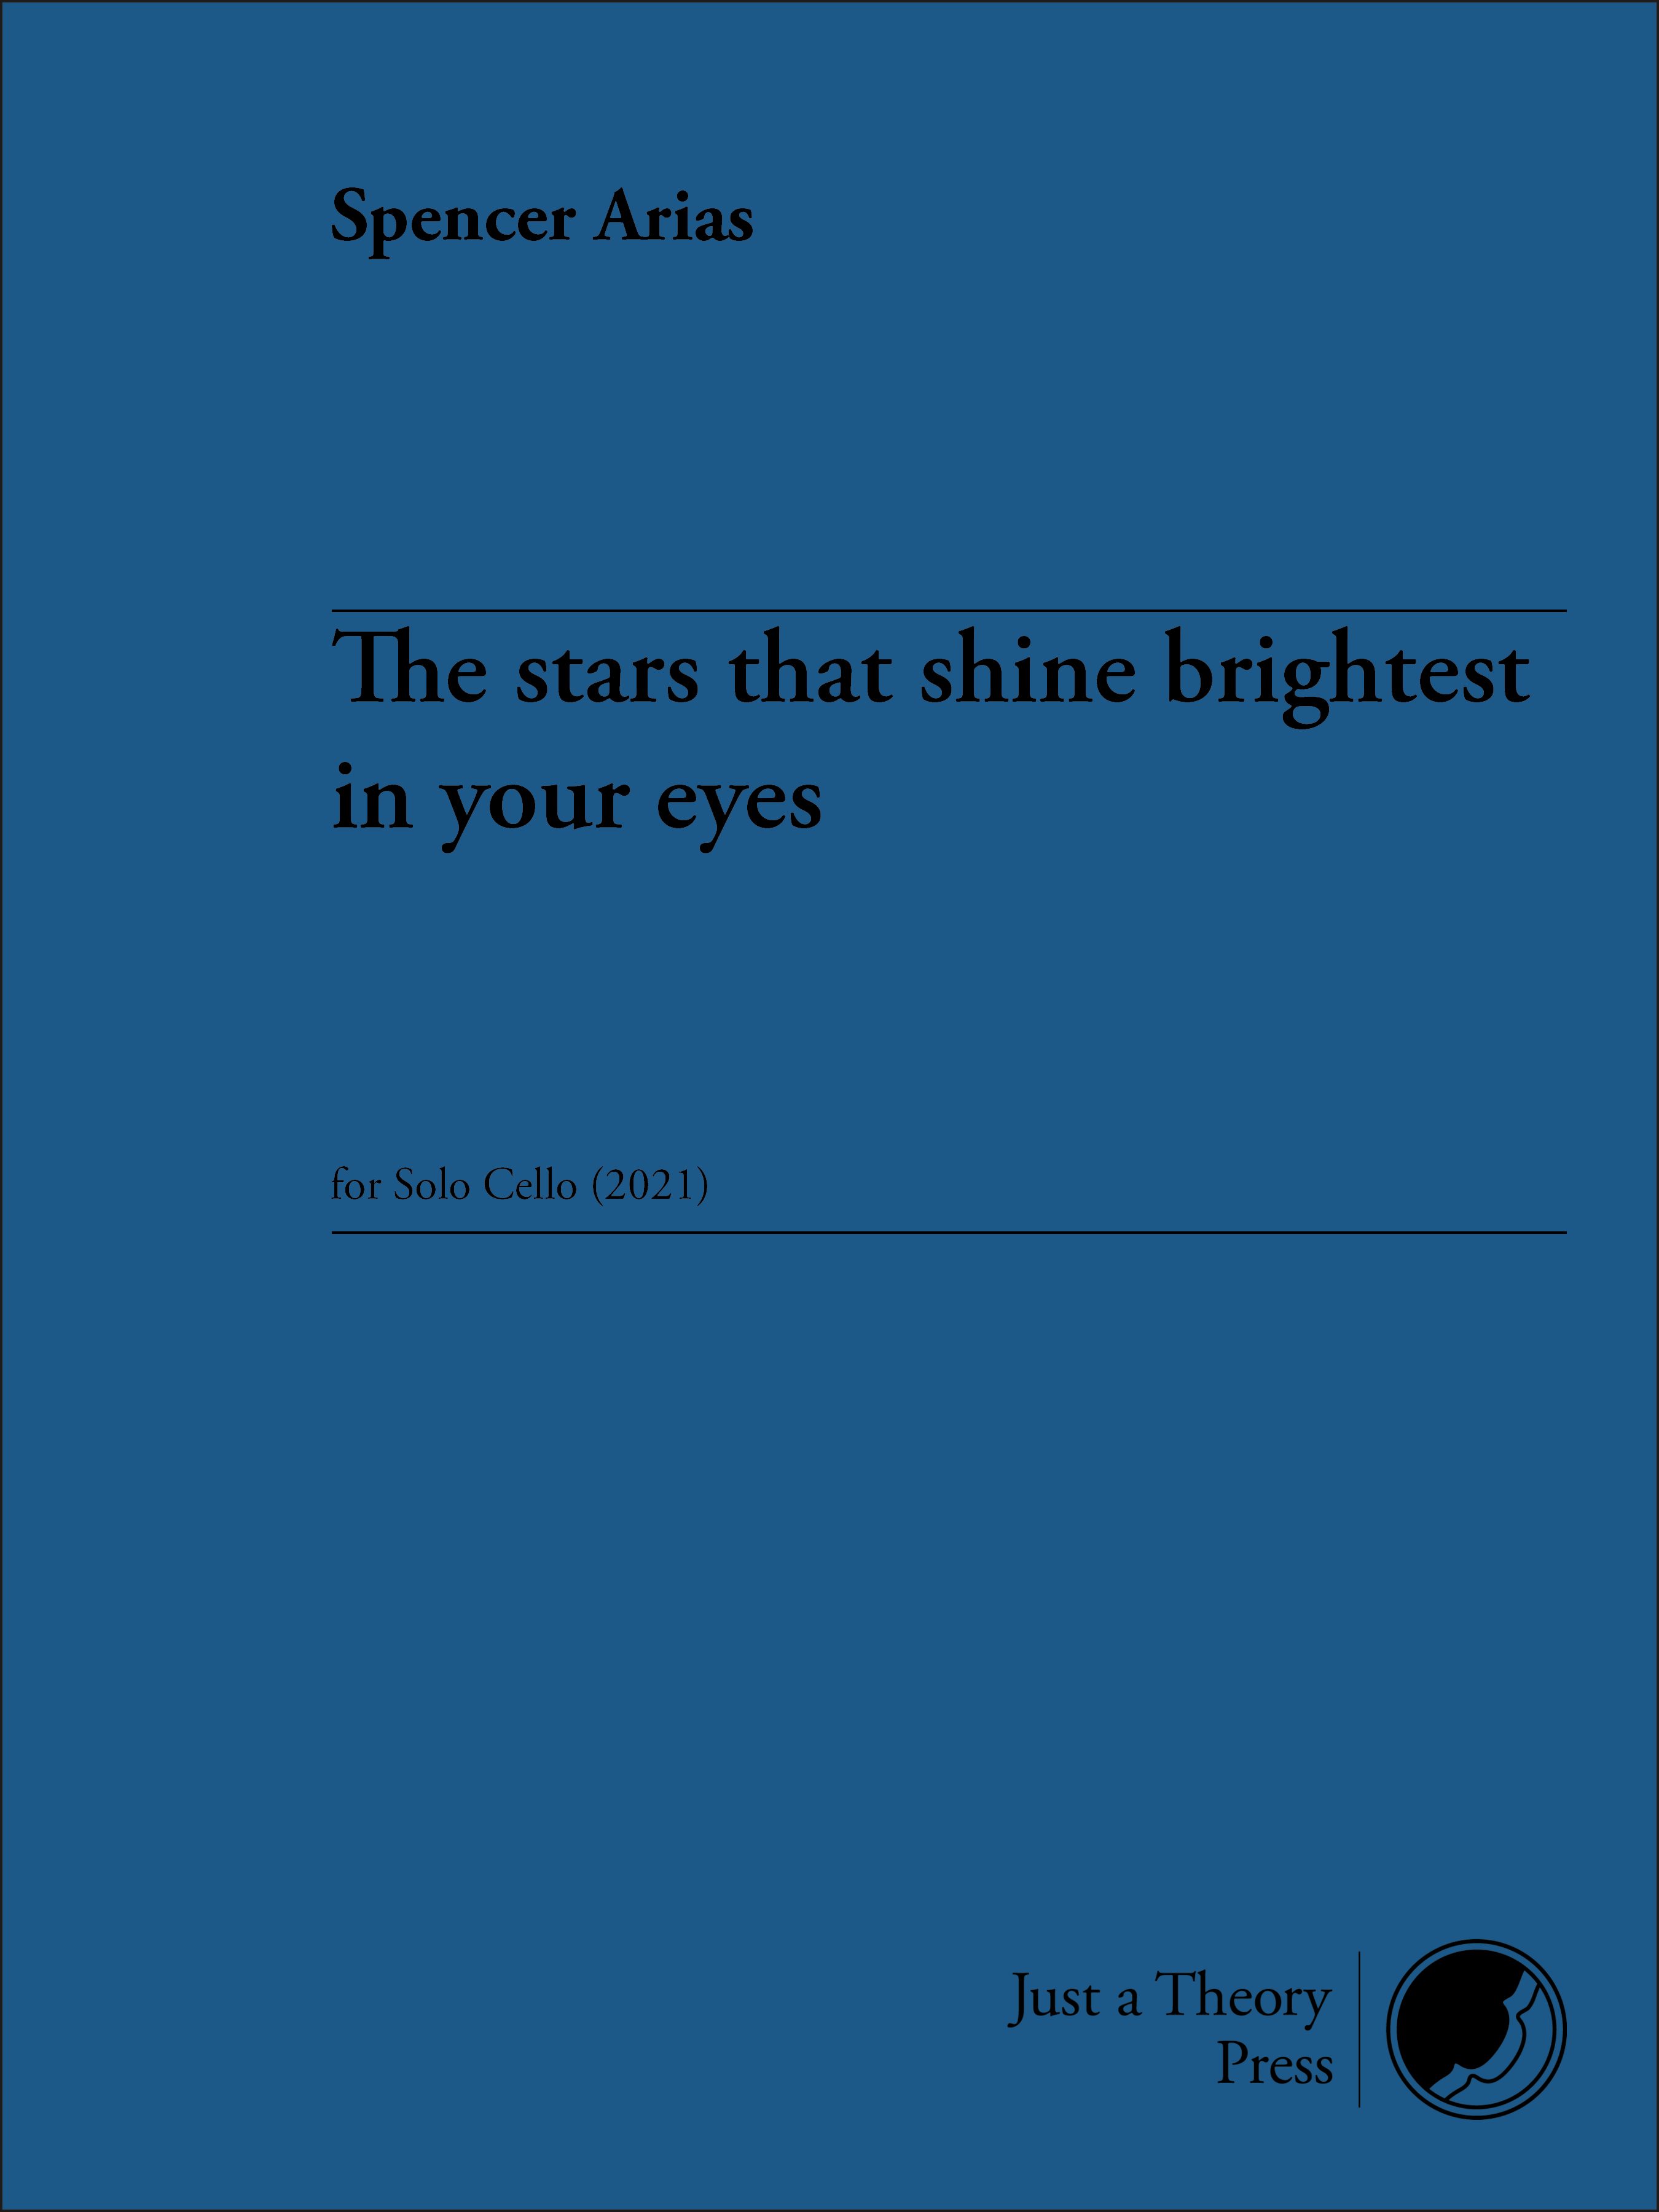 The stars that shine brightest in our eyes